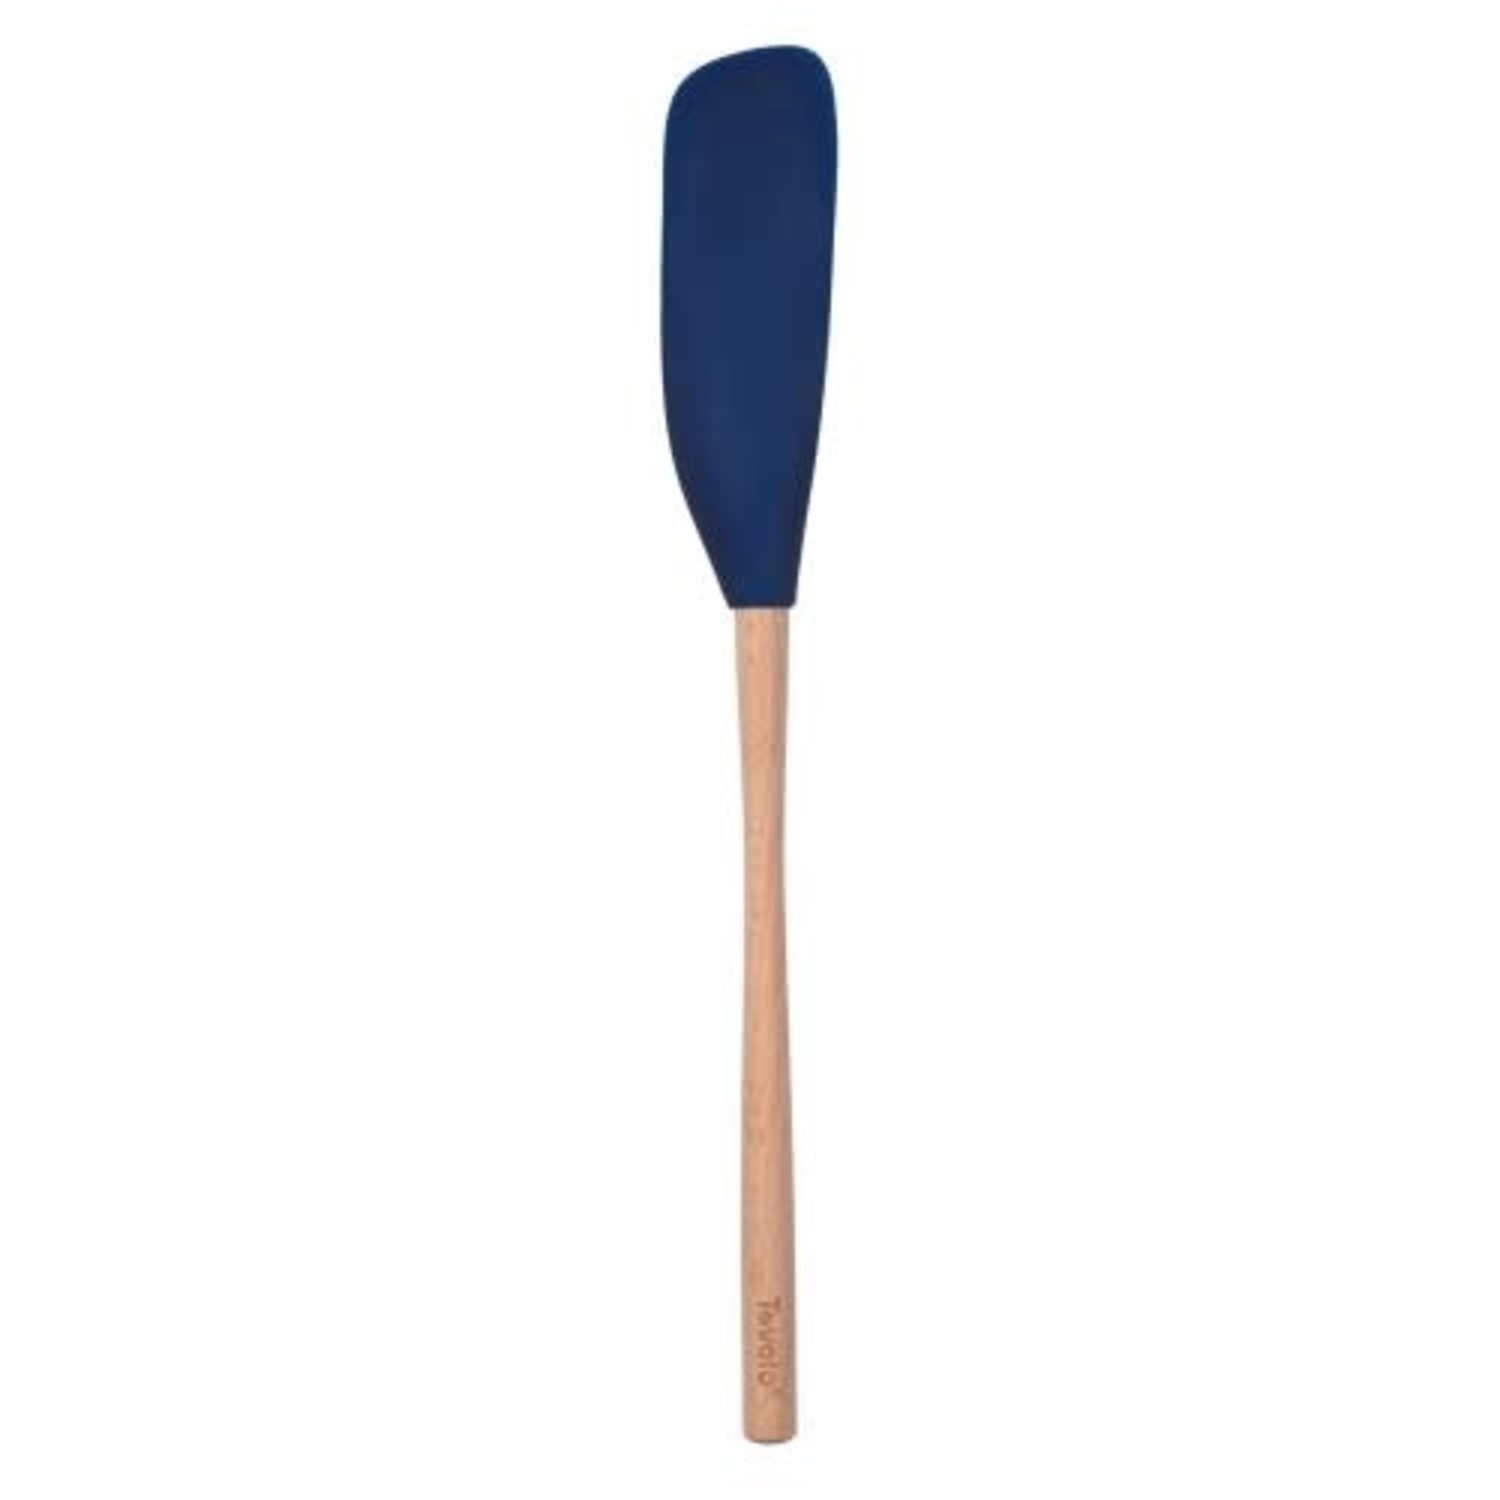 Long handle skinny spatula for small openings, great for paint stirring and  bottom of the jar scraping